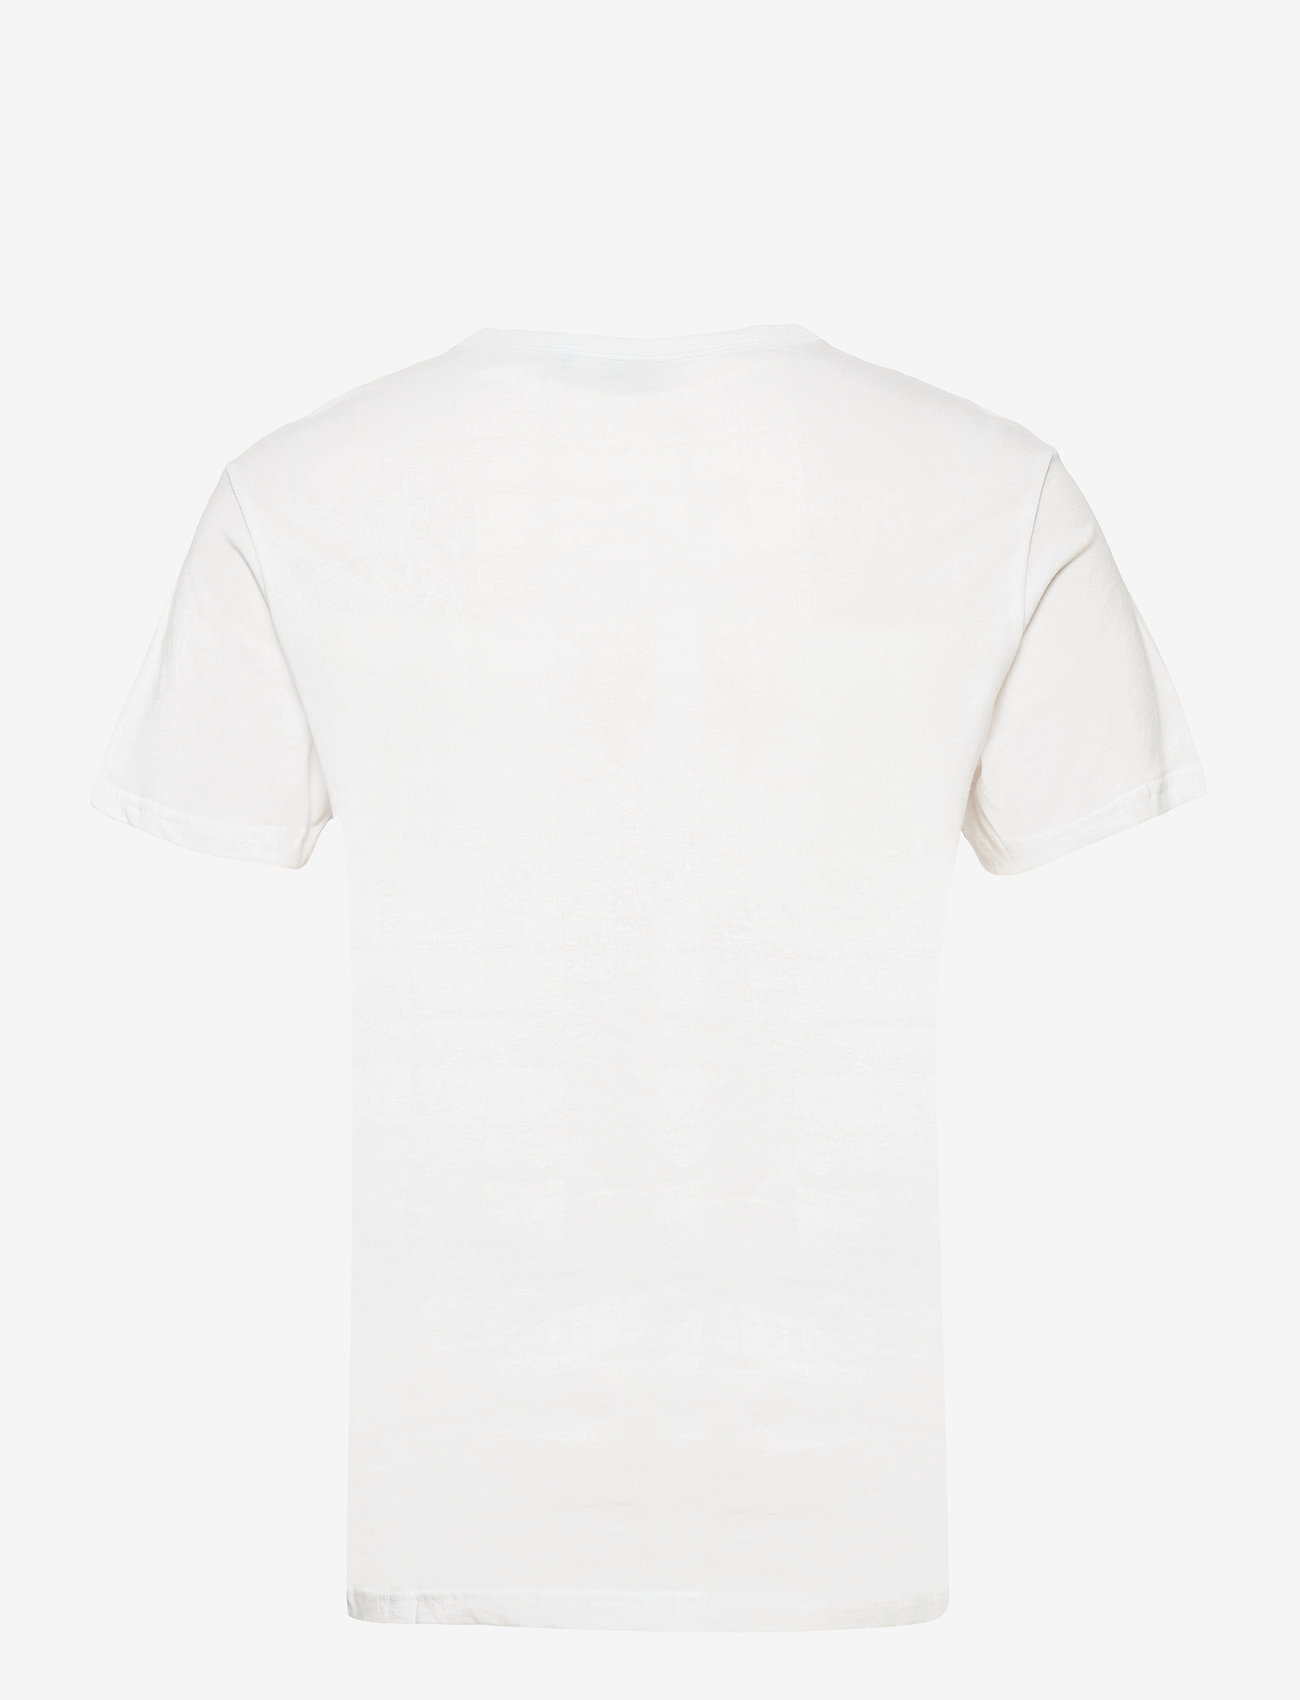 G-Star RAW - Holorn r t s\s - lowest prices - white - 1